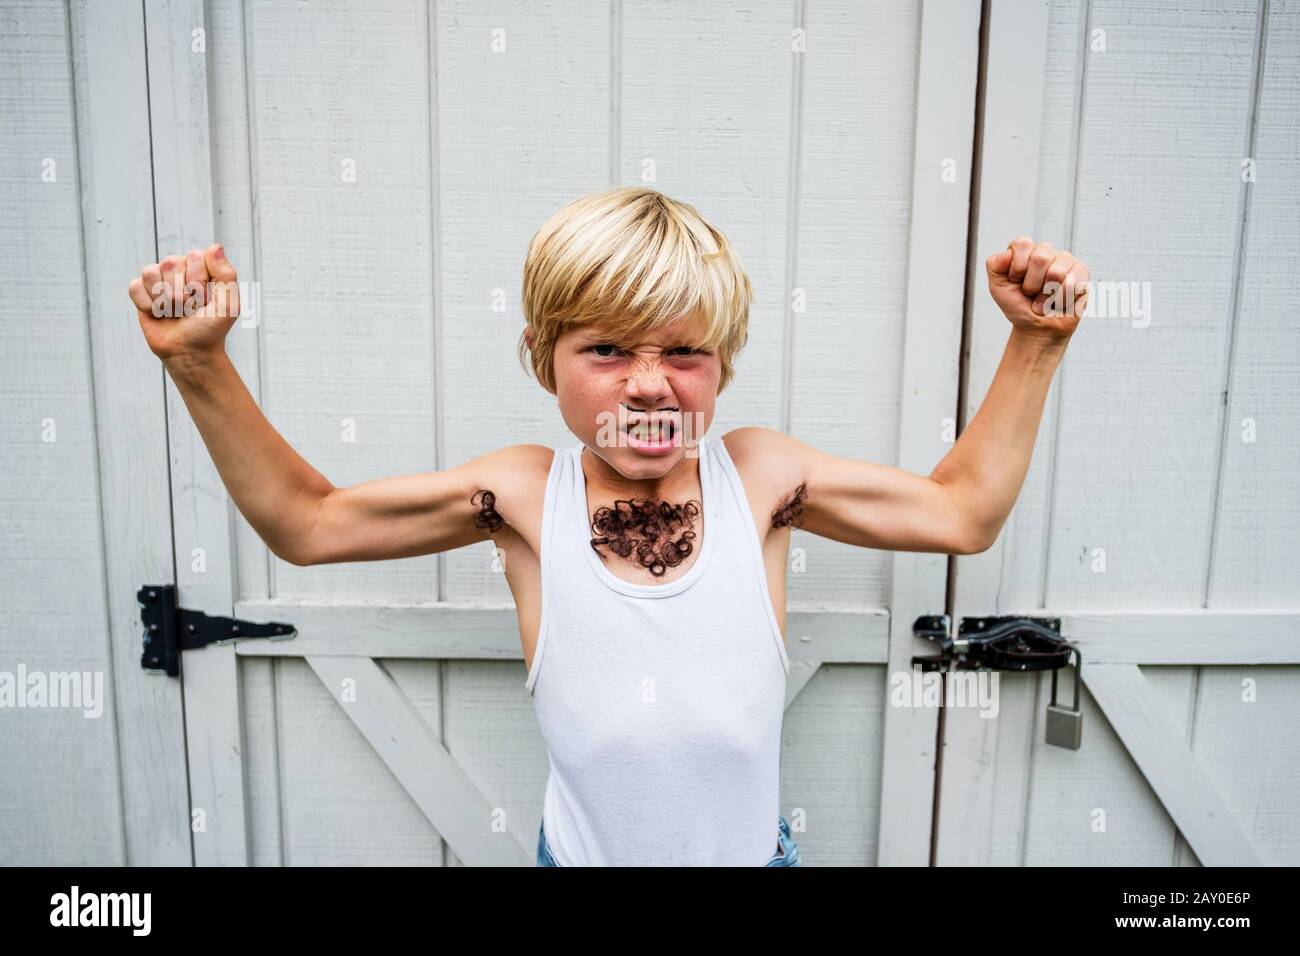 Portrait of a happy boy dressed as a muscleman, USA Stock Photo